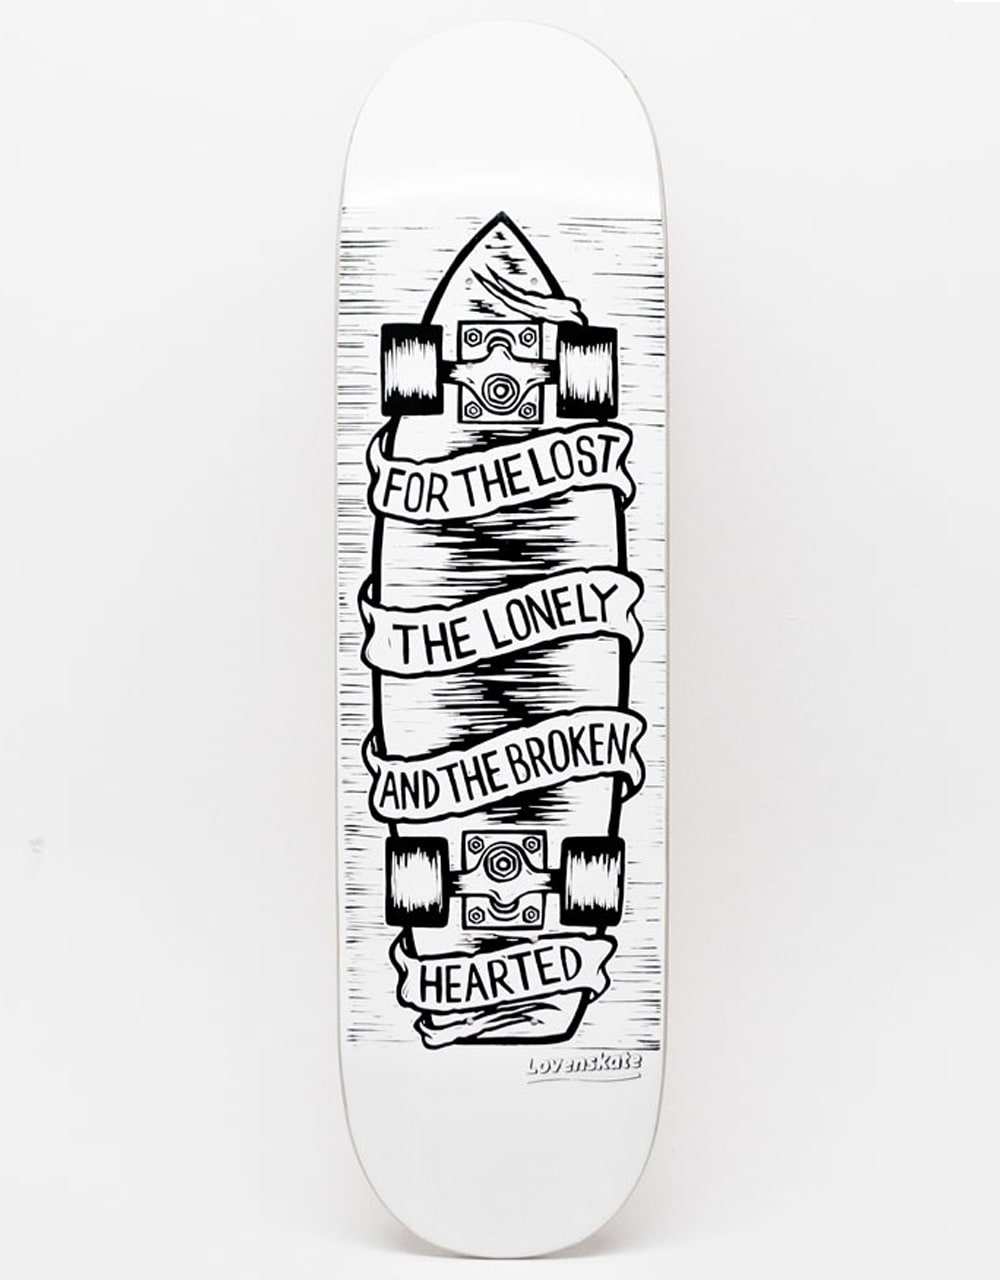 Broken Skateboard Drawing at Explore collection of